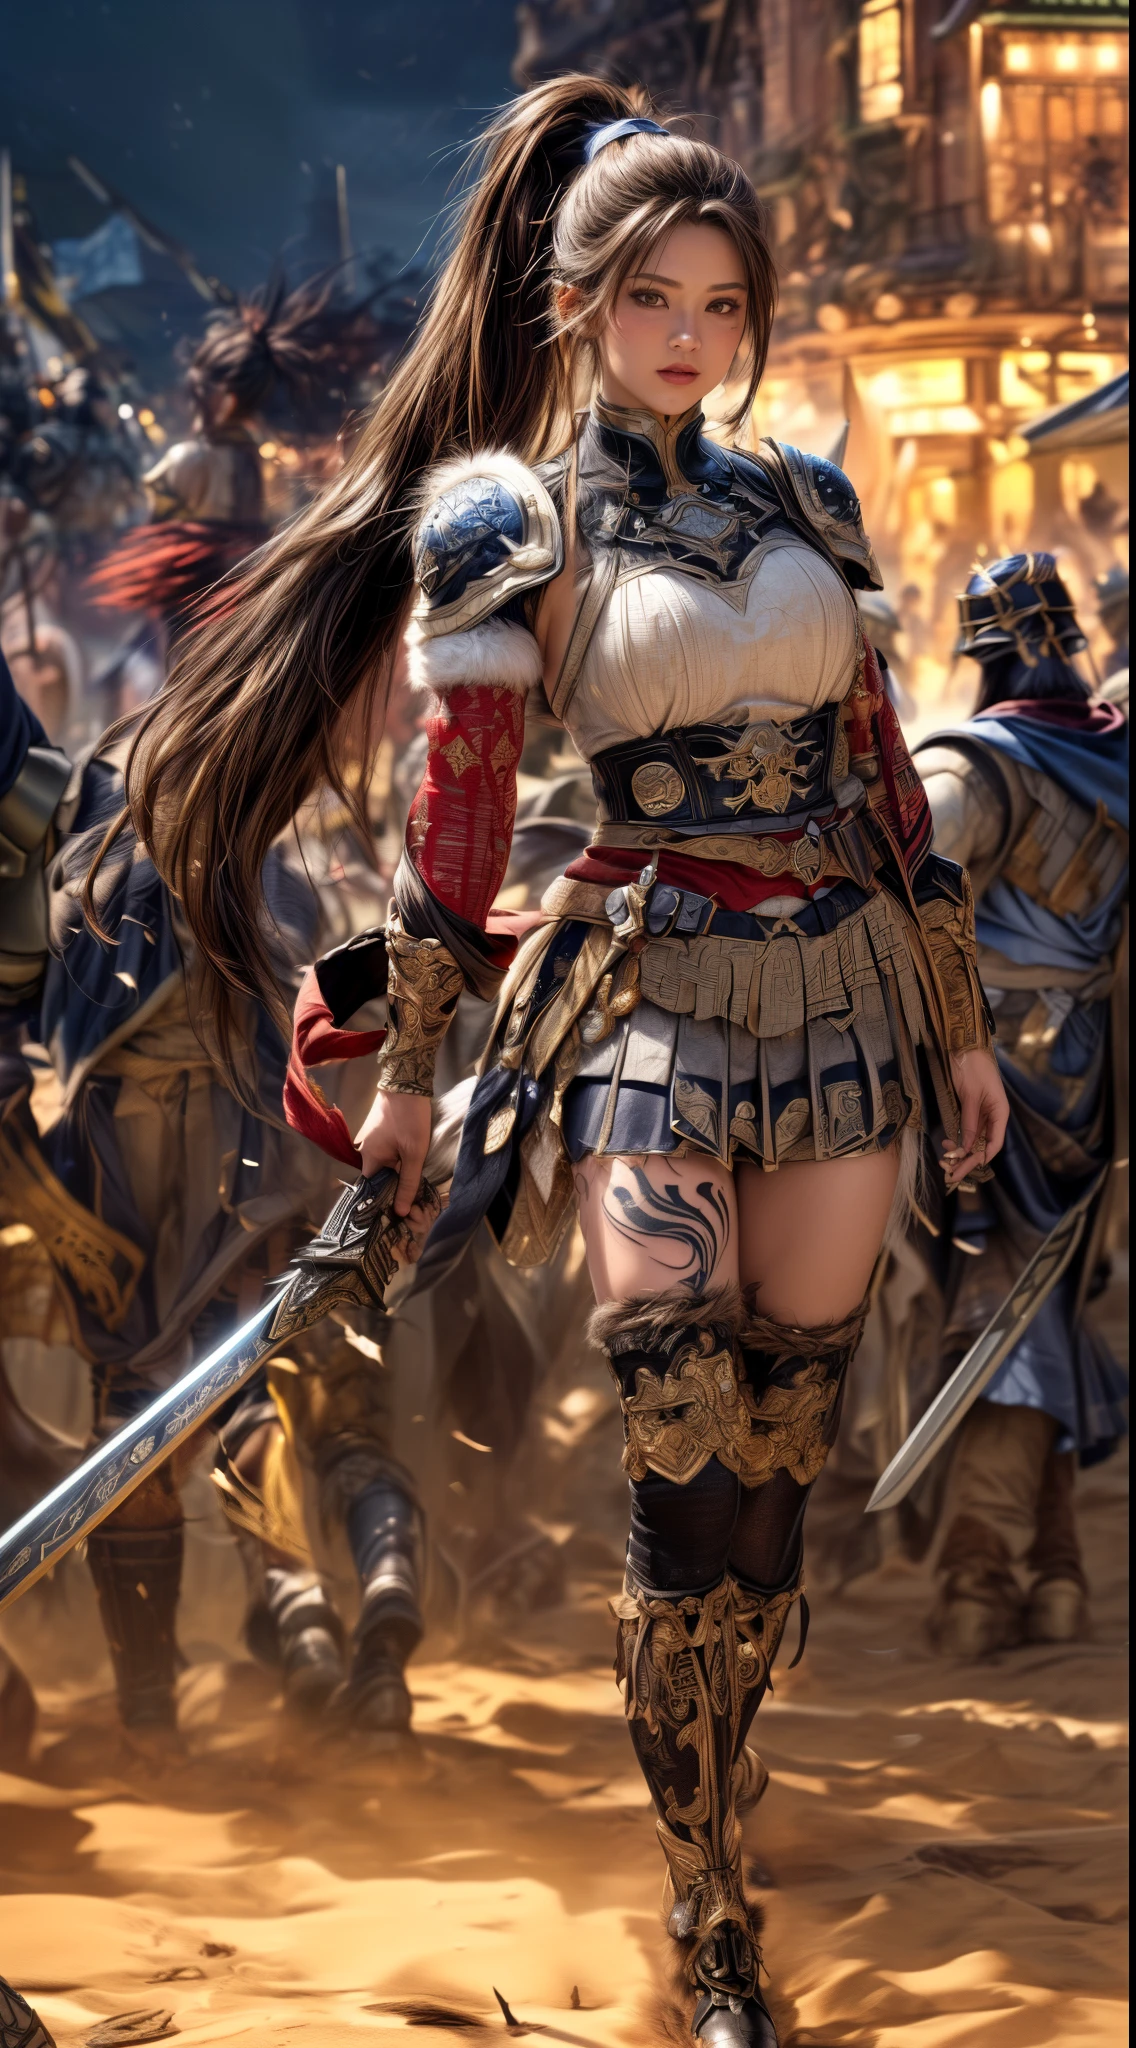 Very beautiful woman、Very tall woman、((muscle))、(Detailed face)、Realistic Skin、((Knights of the Earth)), (((Light brown and black armor:1.25)))、((((Very delicate and decorated light brown and black armor))))、((Delicate photo))，(Girl Astepeace RAW Photo Details:1.25), (highest quality:1.6), (超A high resolution:1.5), (Realistic:1.75), 8K resolution, Canon EOS R5, 50mm, absurdes, Ultra-detailed,Cinema Lighting,Battlefields of Medieval Europe、((battle))、RPG World、Final Fantasy、(((Embellished skirt)))、Thigh-high socks、Shin Guards、night、((((Messy center parted high ponytail))))、((Get six-pack))、Torn Cloak、((Beautiful Armor))、(((Huge weapons)))、In combat、The wind is blowing、(((Leading a large group of knights:1.3)))、(((Knight Commander)))、(Banner)、Great Ape Emblem、(((Light brown as the main color)))、(((black tribal tattoo)))、Dust、(((Wearing fur)))、(Rocky area)、(((Battle Scene)))、((nsfw))